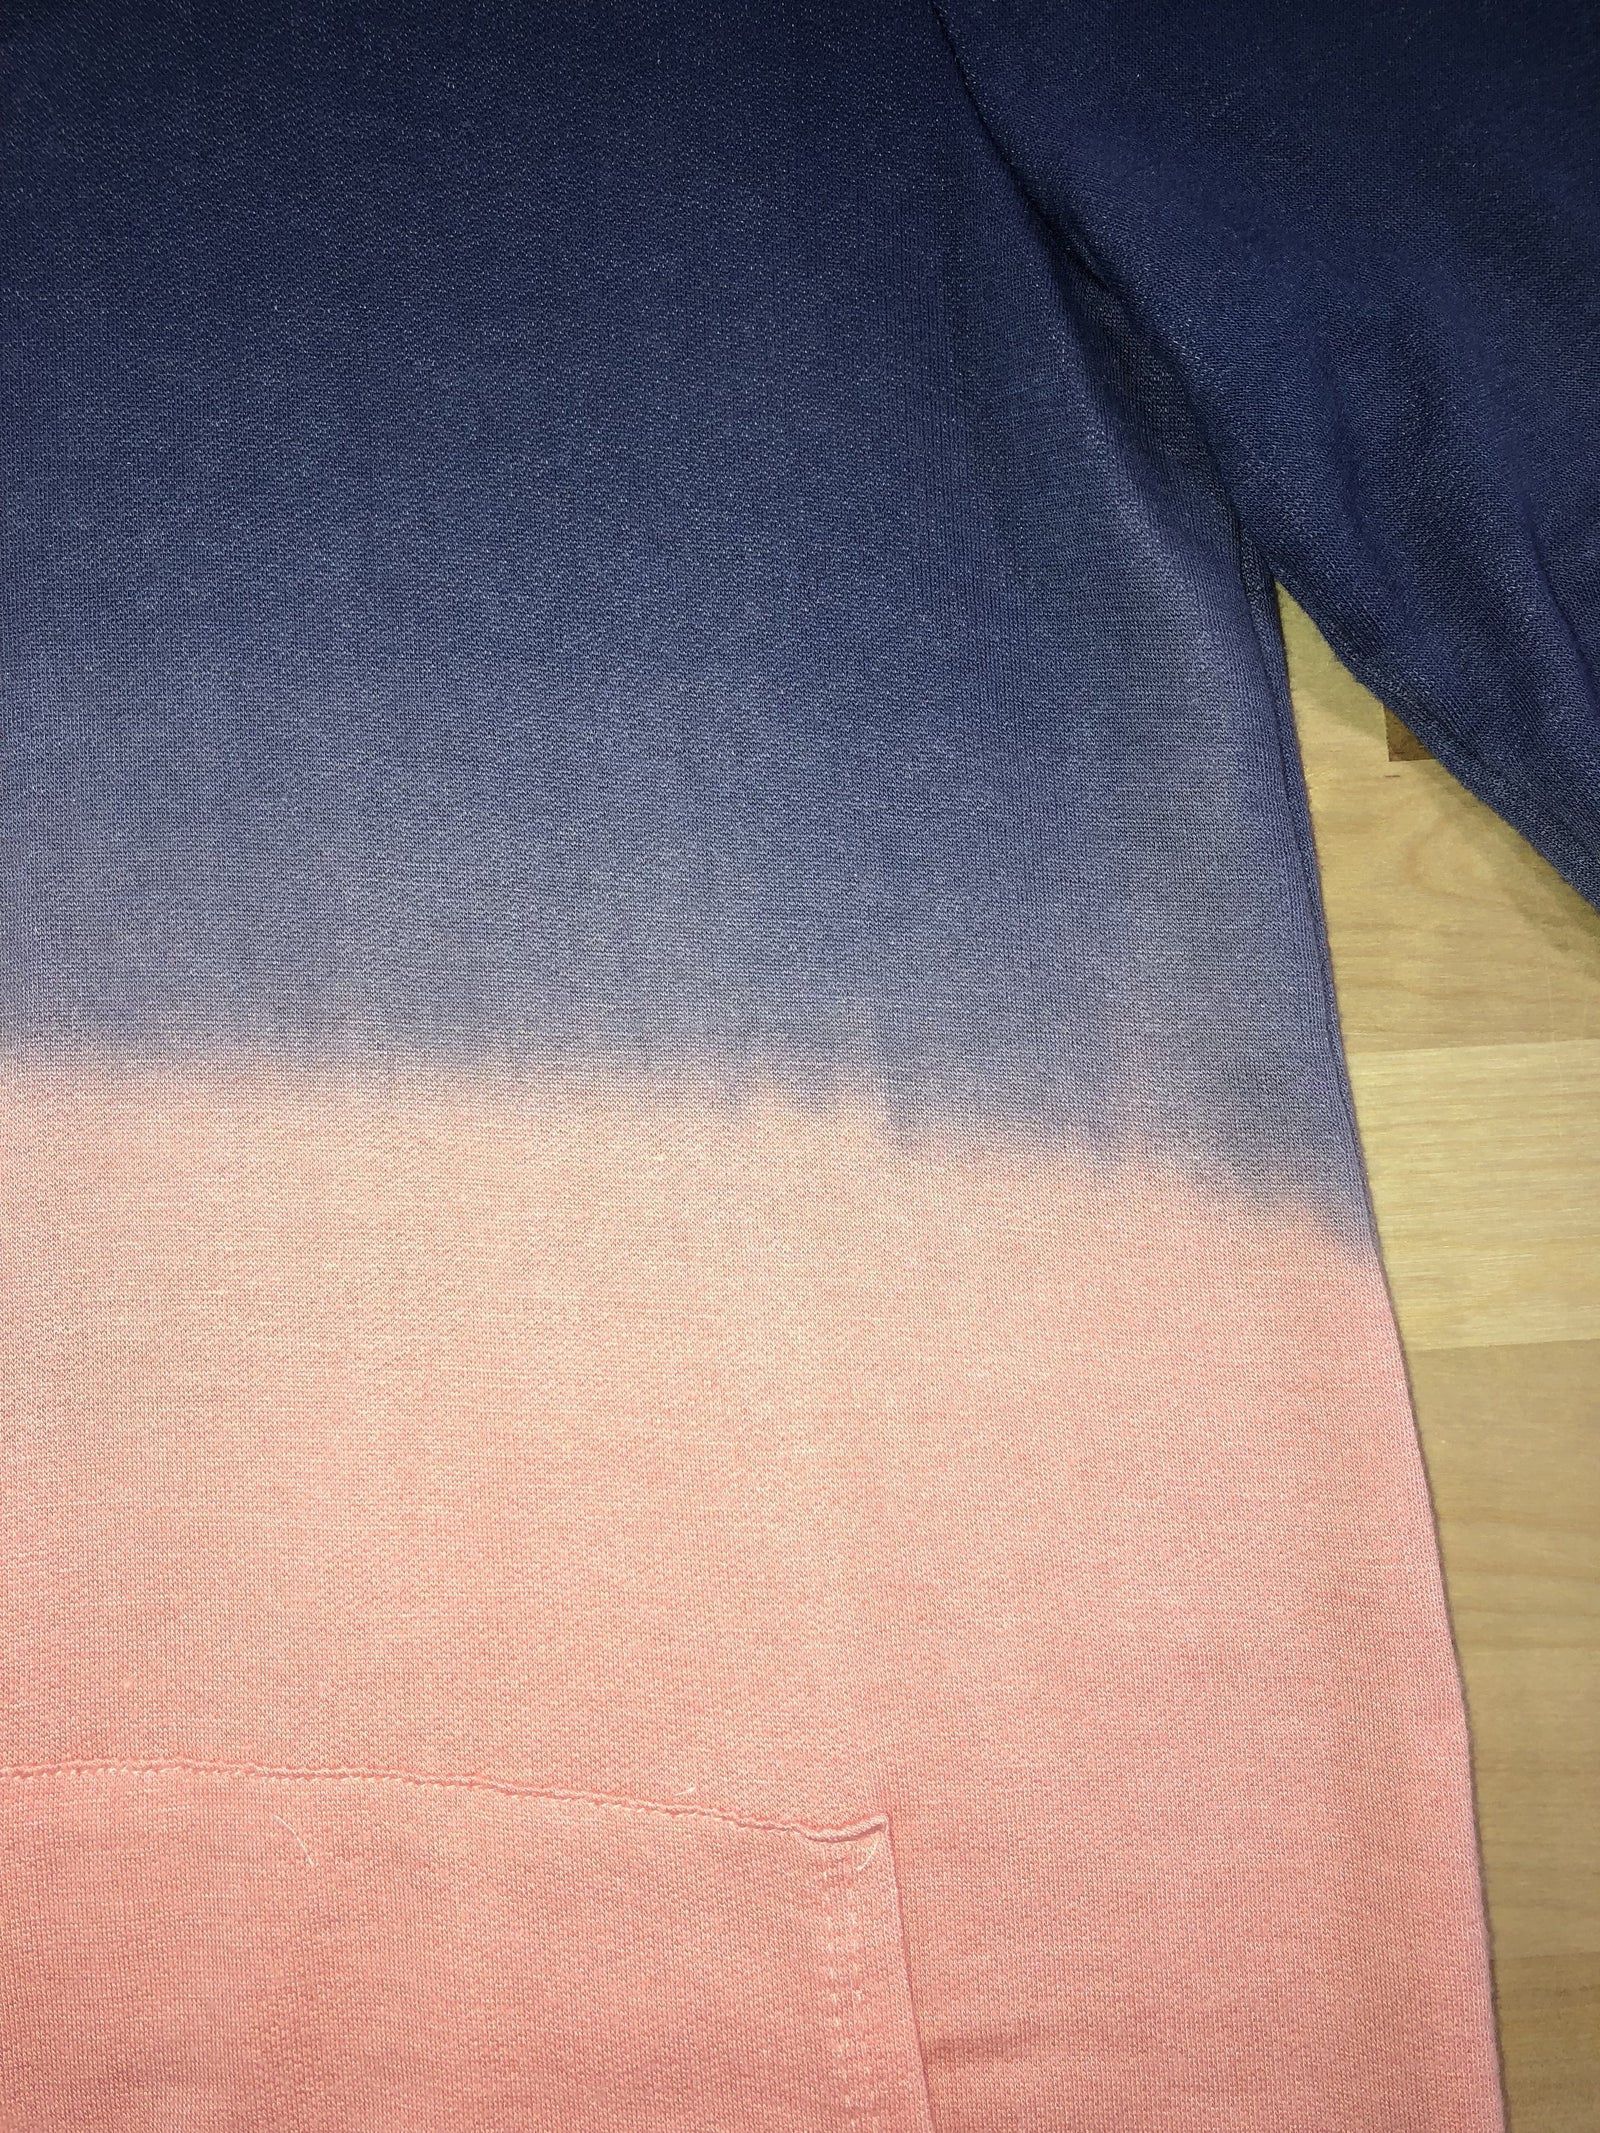 *2nds* - Navy & Peach Ombre Hoodie